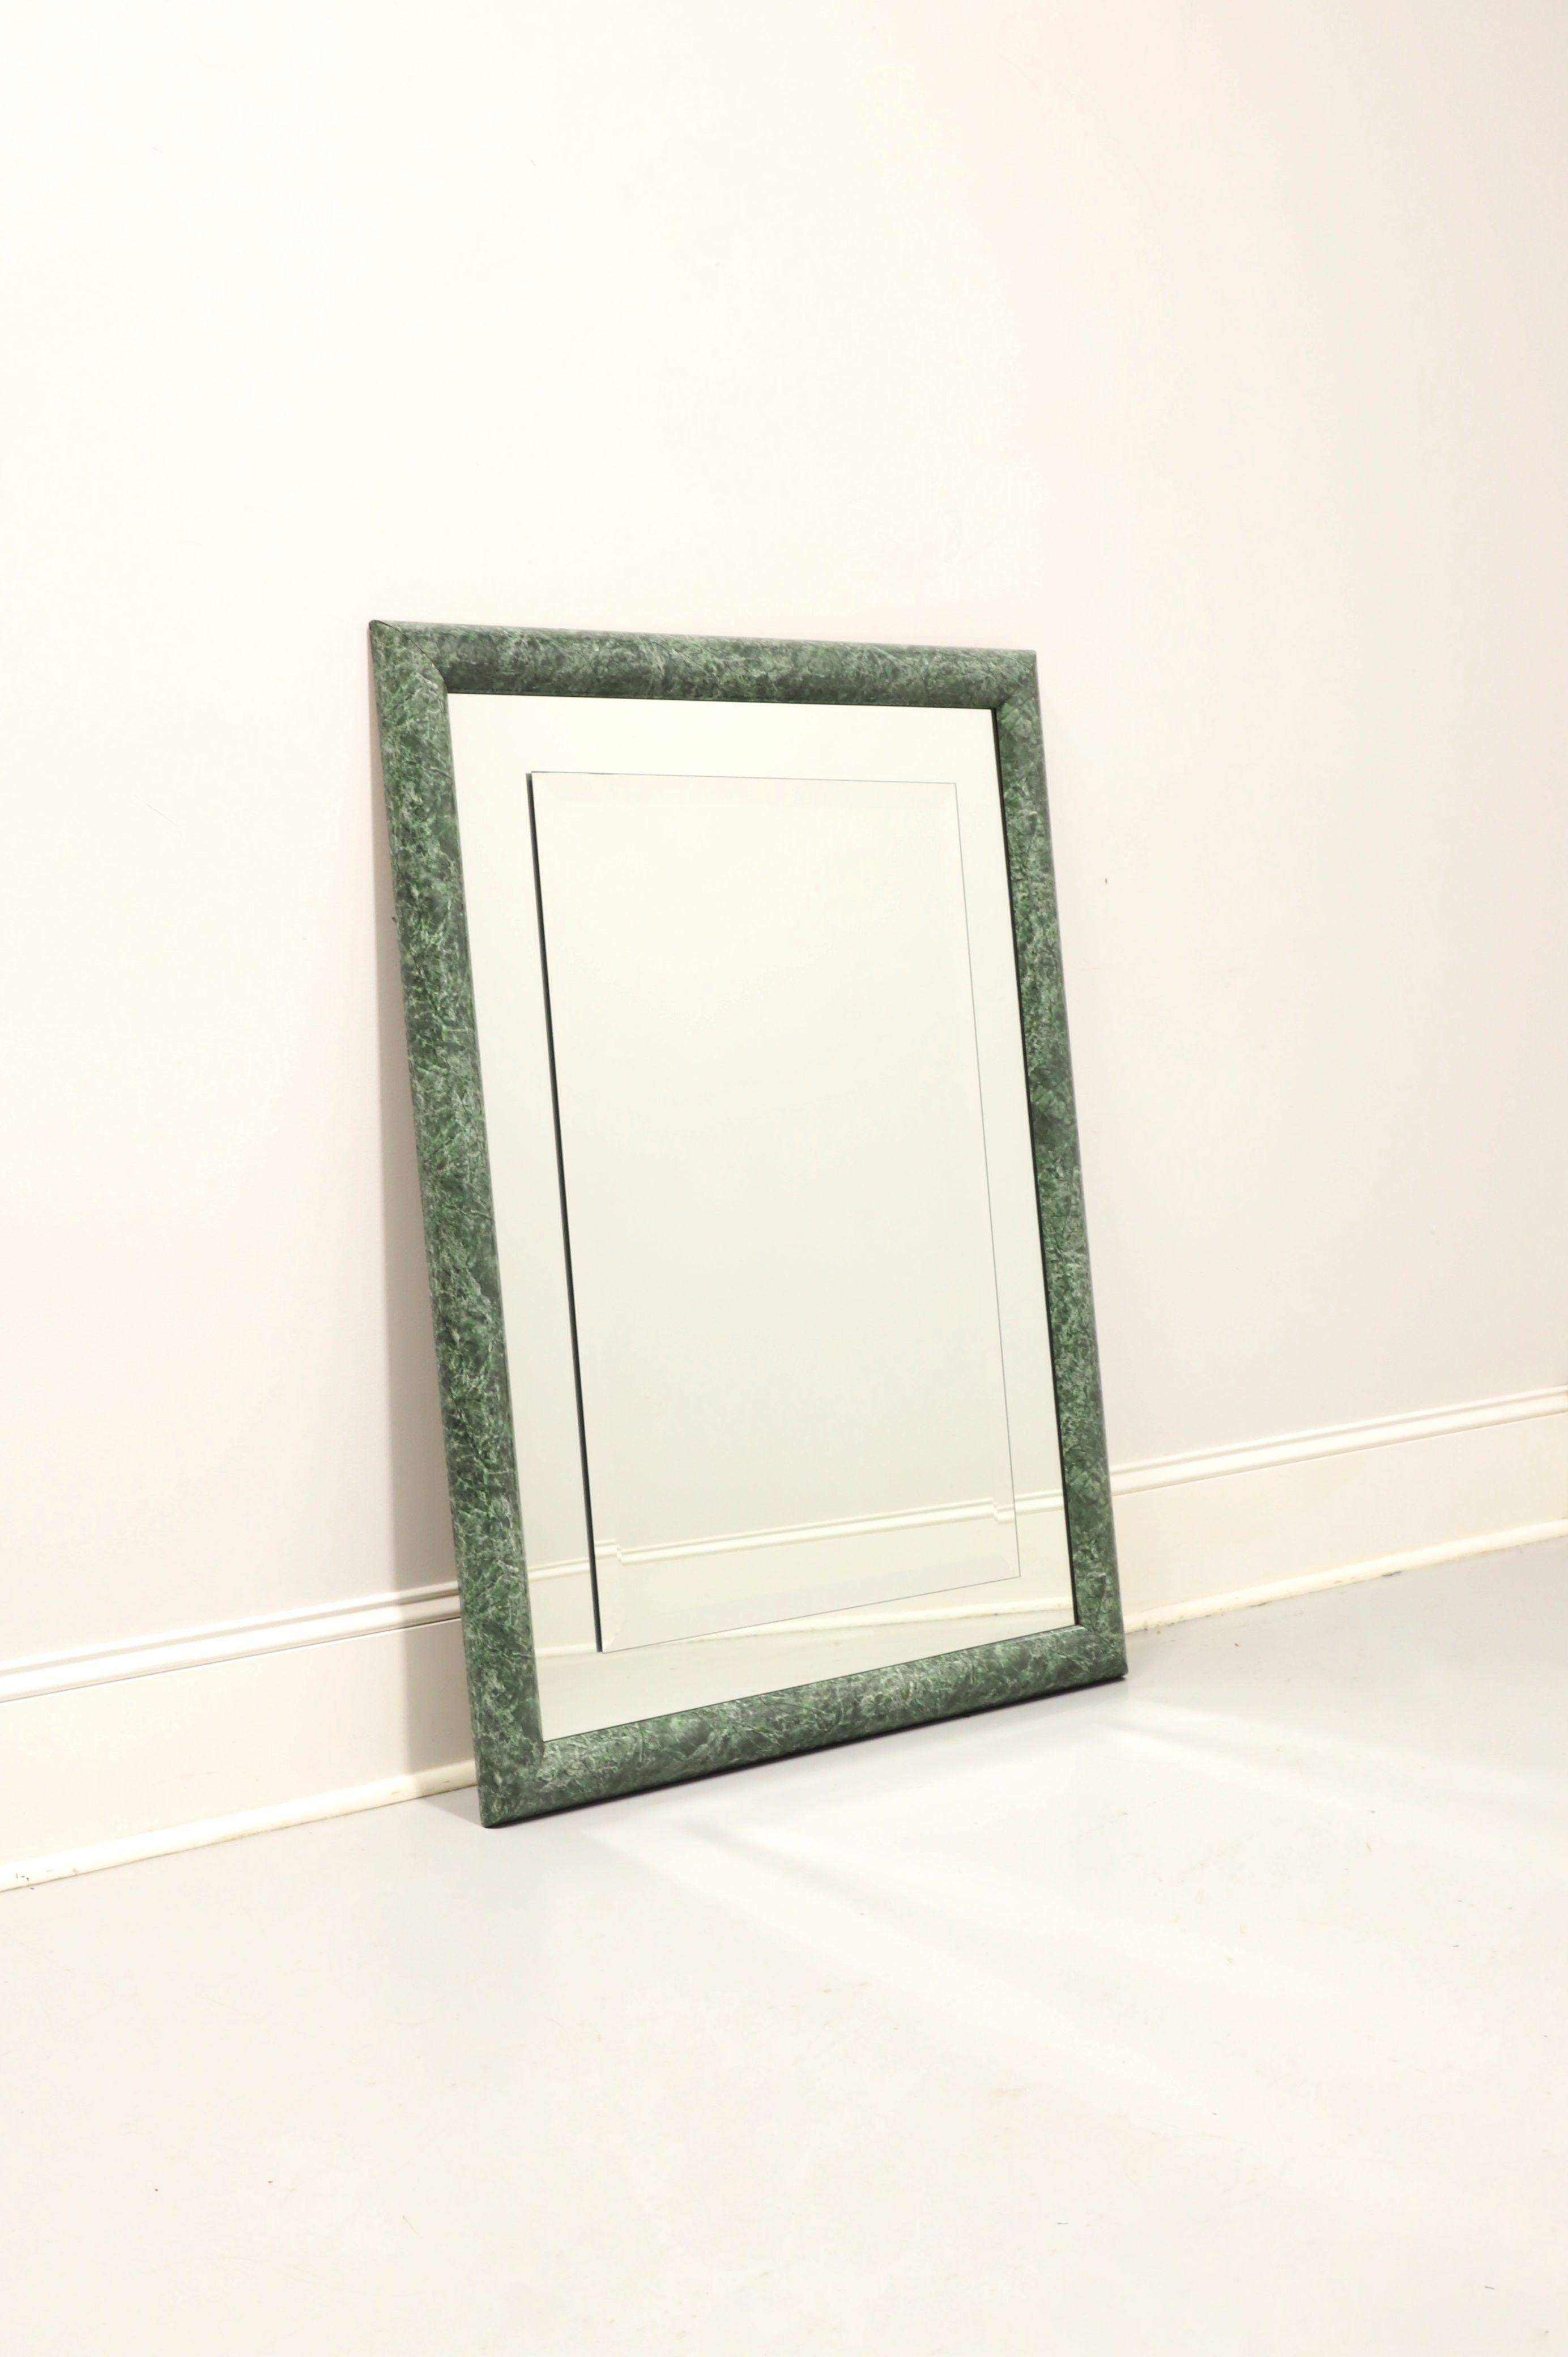 A Contemporary style wall mirror, unbranded, similar quality to Carolina Mirror. Beveled mirror glass with a matte of mirror glass and in a green faux marble (laminate over wood) frame. Made in the USA, in the late 20th century. 

Measures: 30.5w